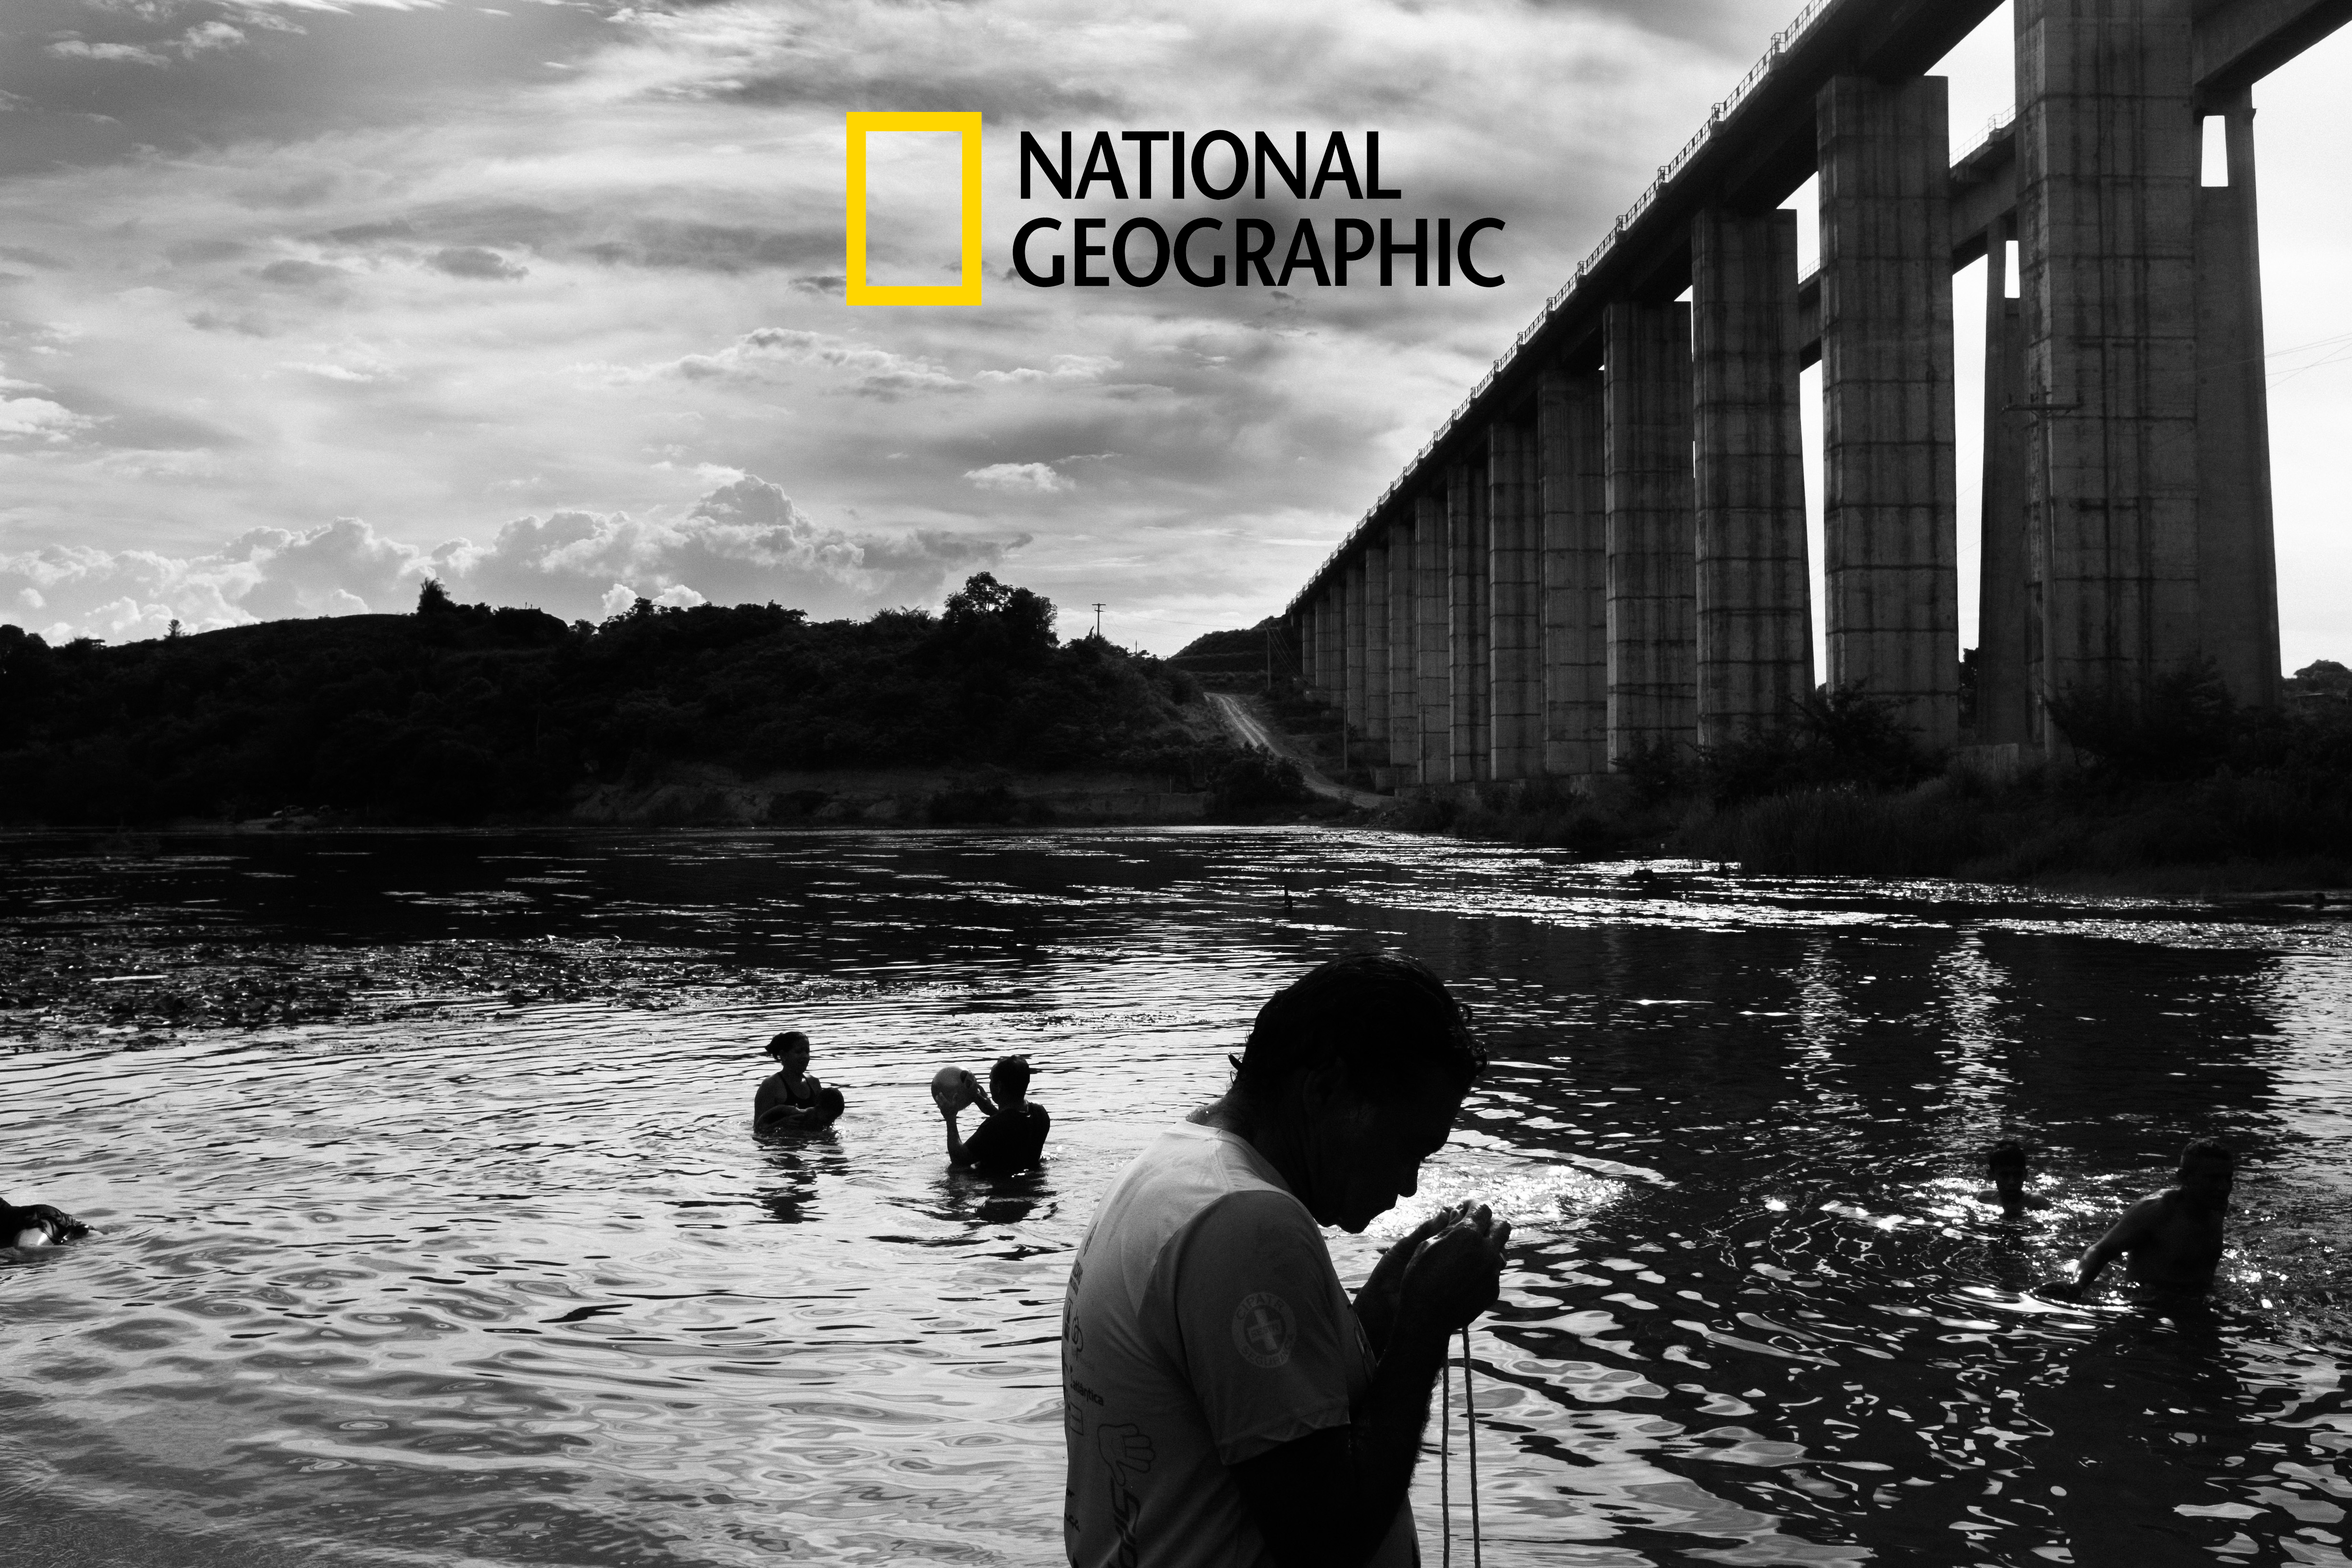 On NatGeo: To carry iron to the world, Brazil’s 500-mile rail disrupted countless lives